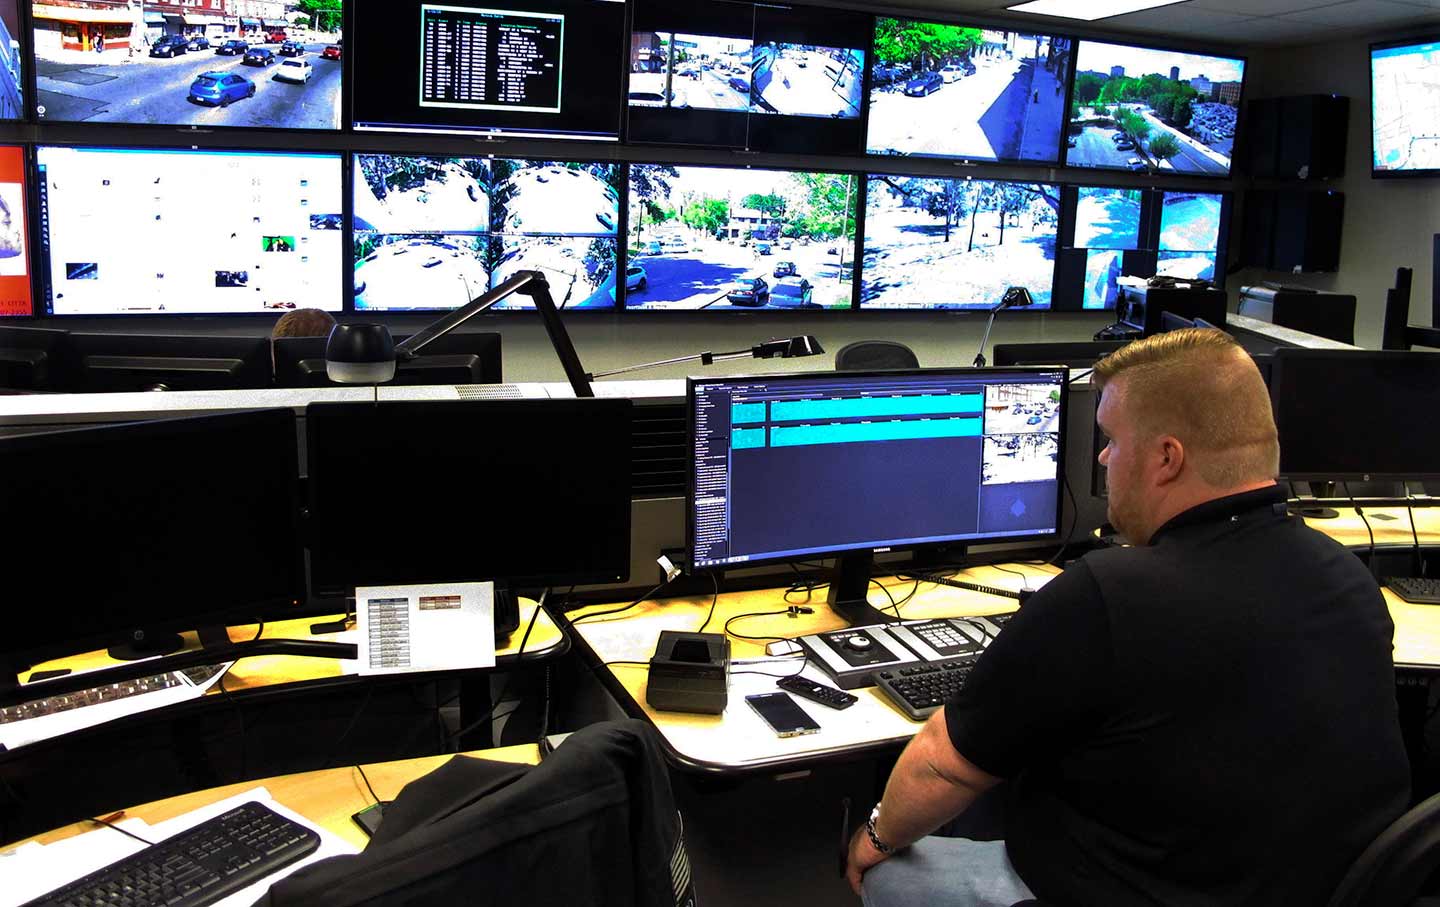 A police looks at a series of row of monitors.